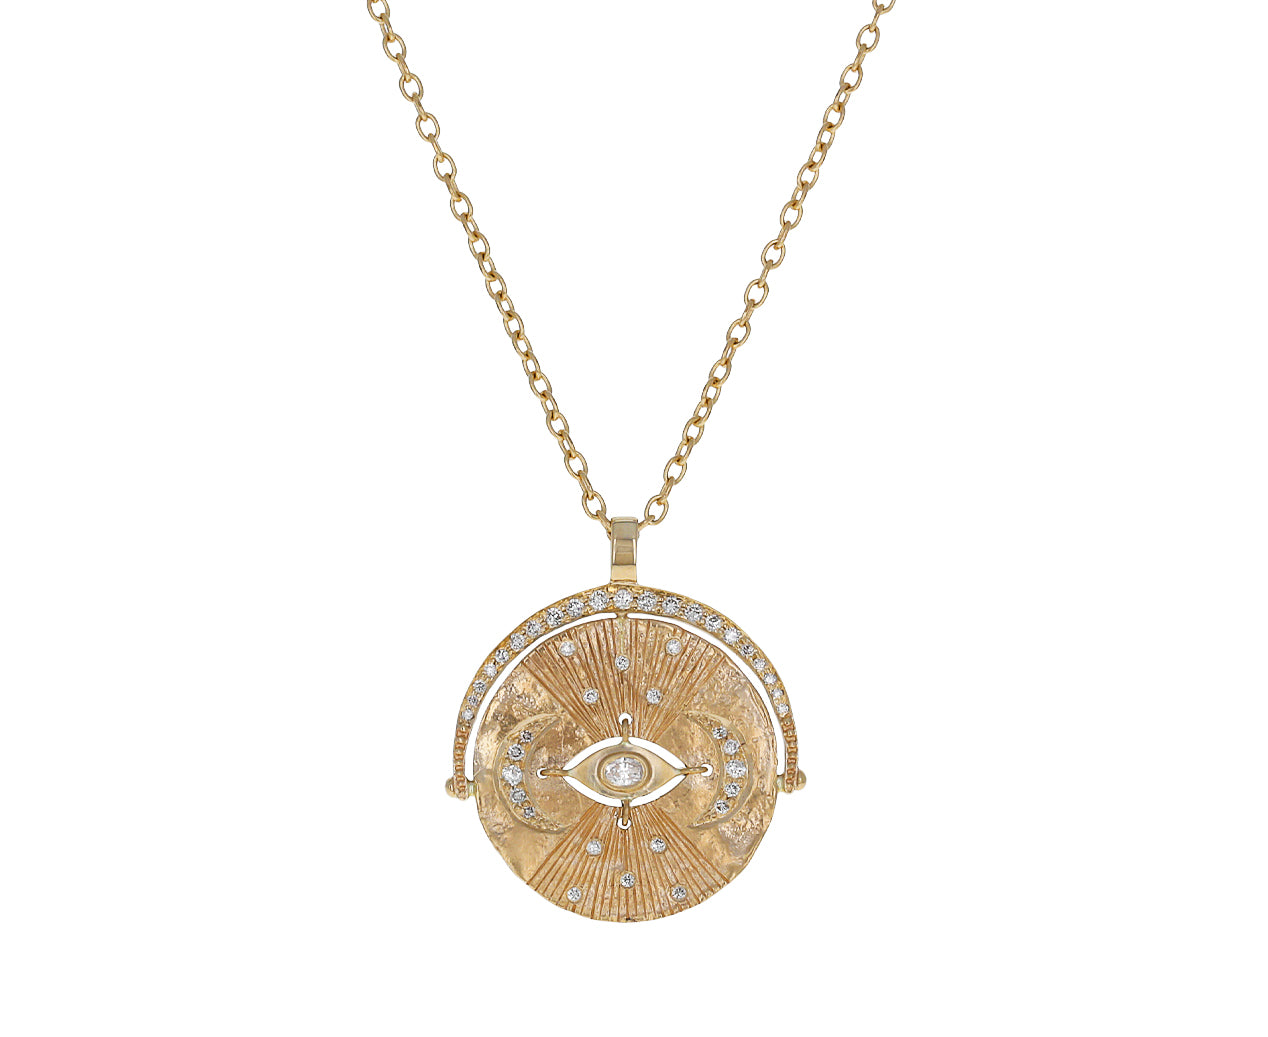 The History of the Evil Eye — The Best Evil Eye Jewelry